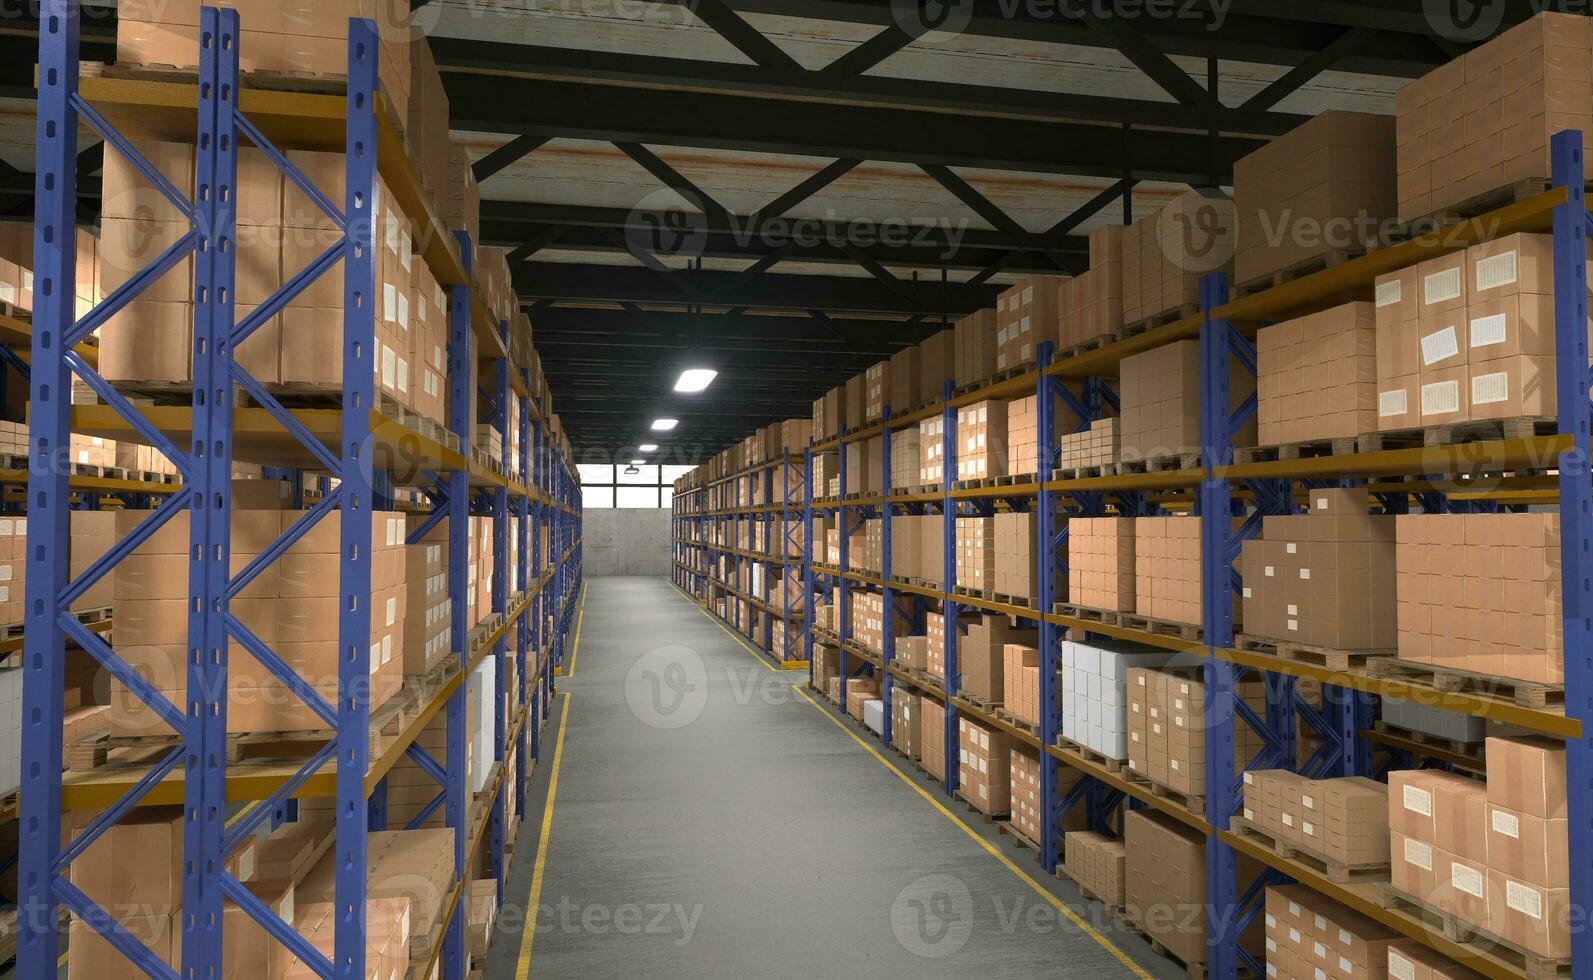 Racks in distribution center filled with cardboard packages ready to be picked up and transported to clients worldwide, 3D render. Warehouse building with shelves full of stowed merchandise wares photo